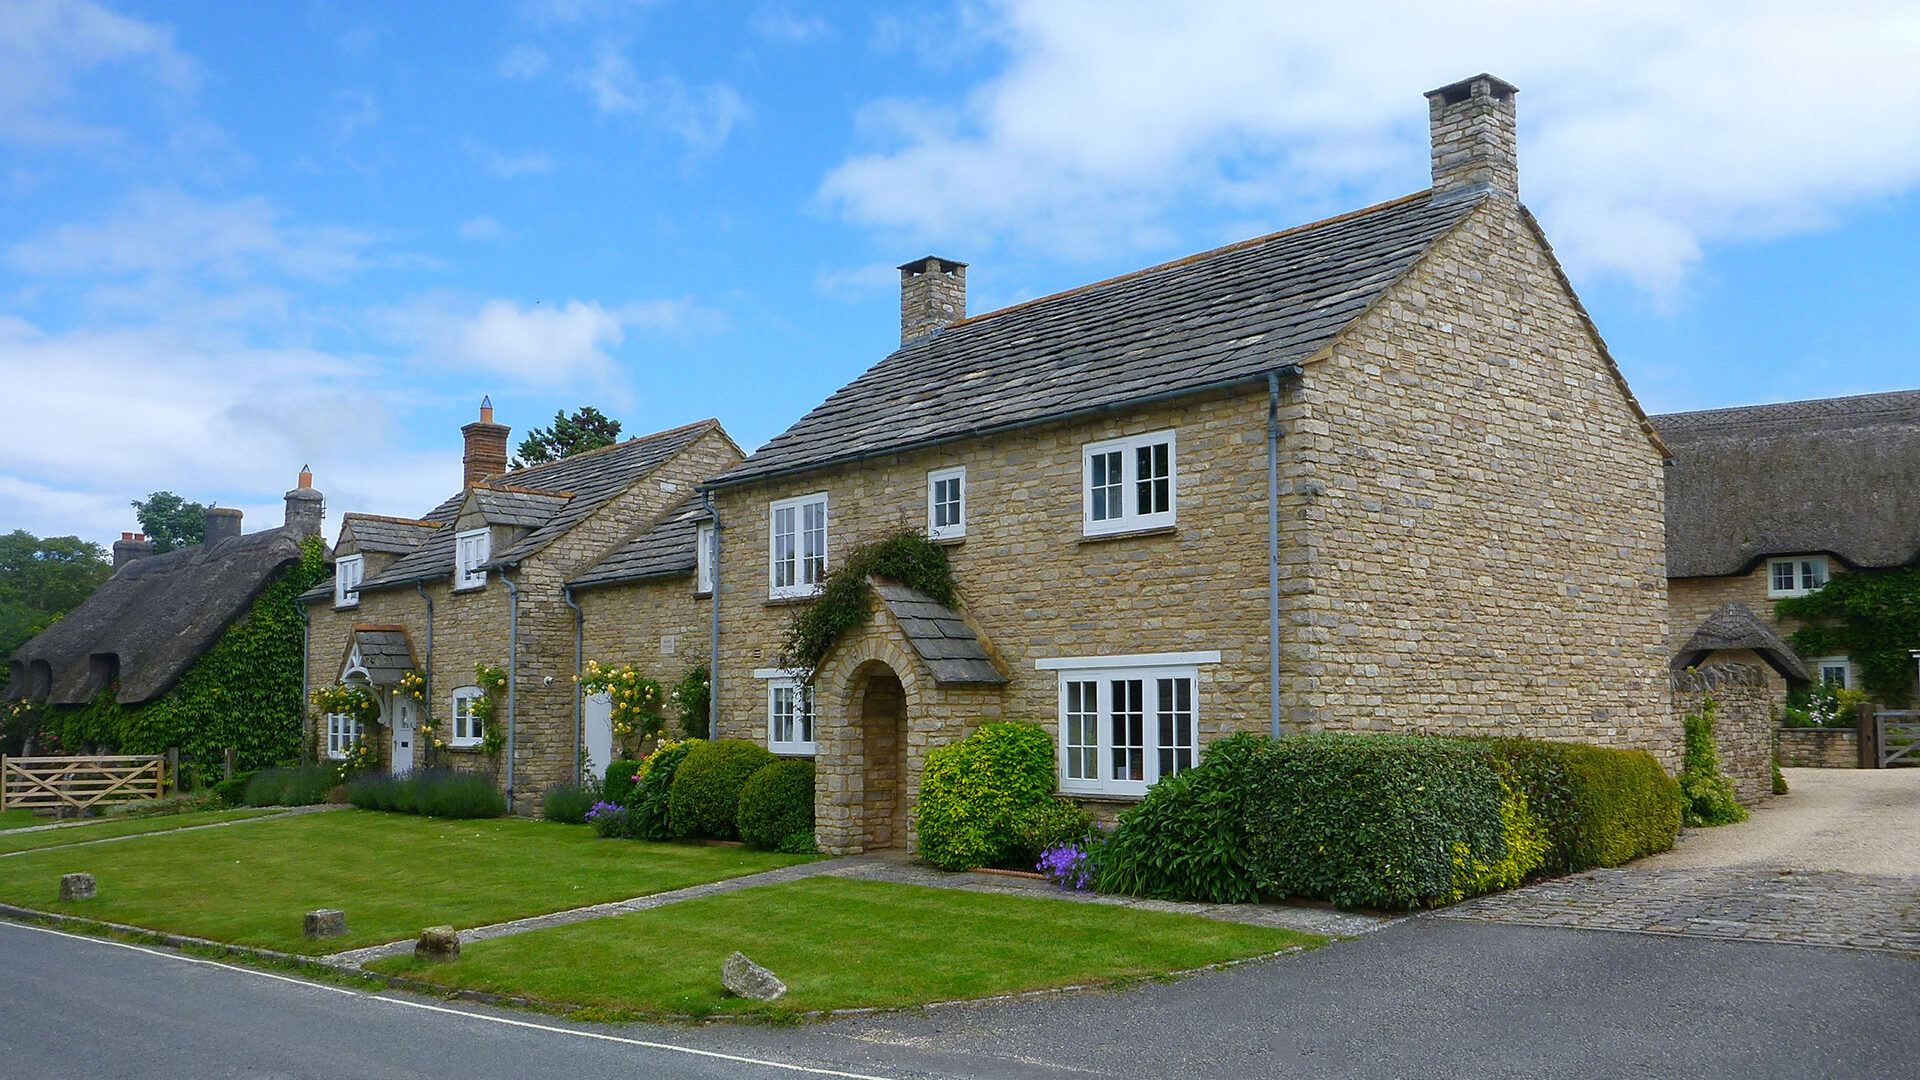 front view of traditional stone cottages with front lawns, taken from road